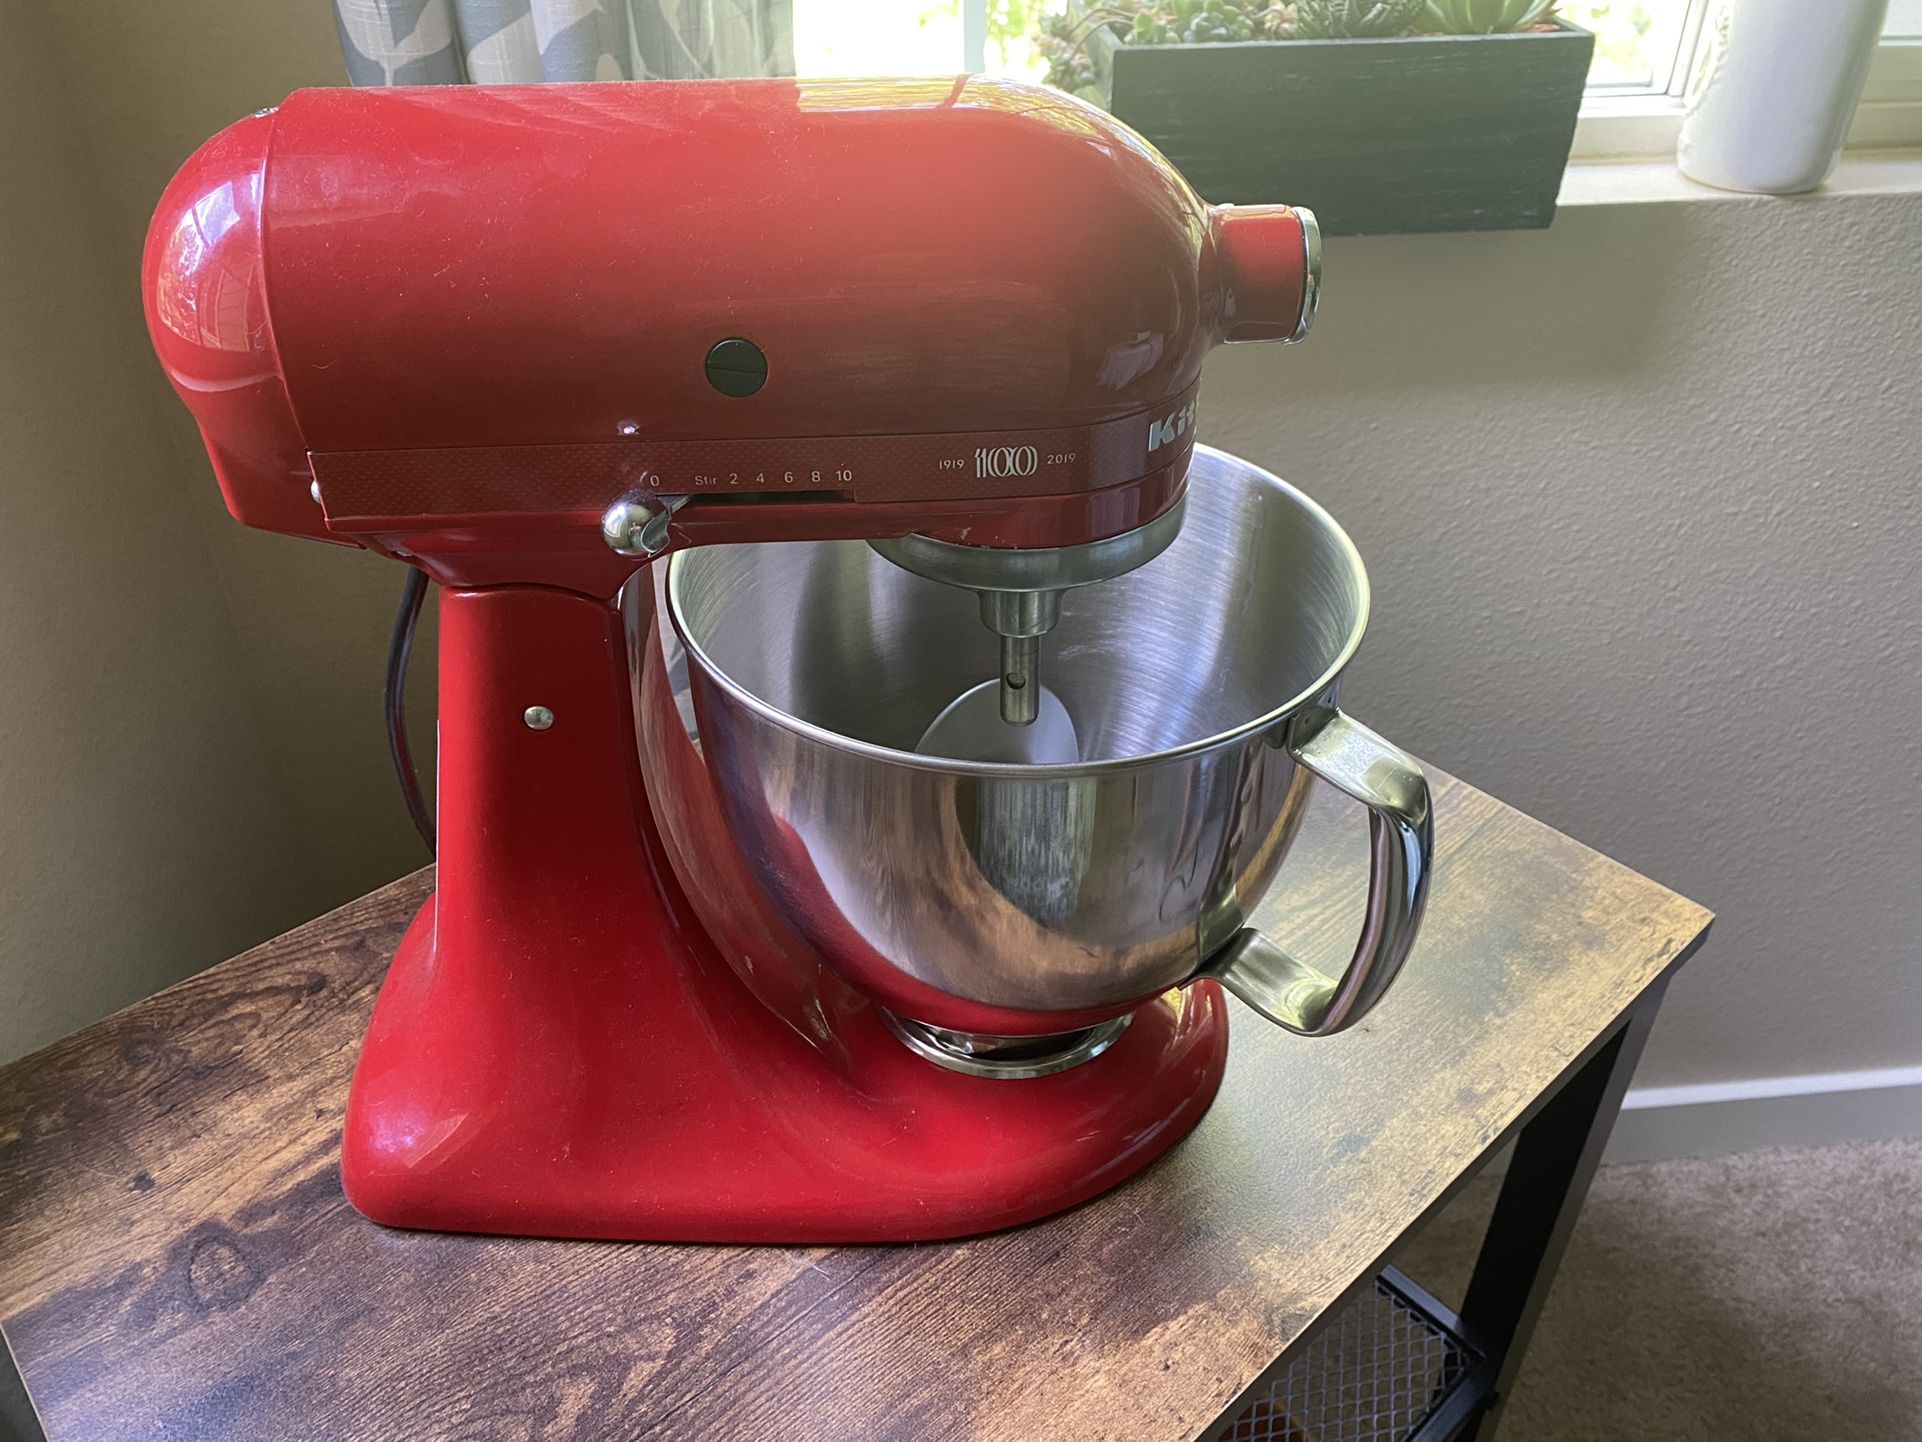 Kitchenaid Classic Stand Mixer for Sale in Enterprise, NV - OfferUp